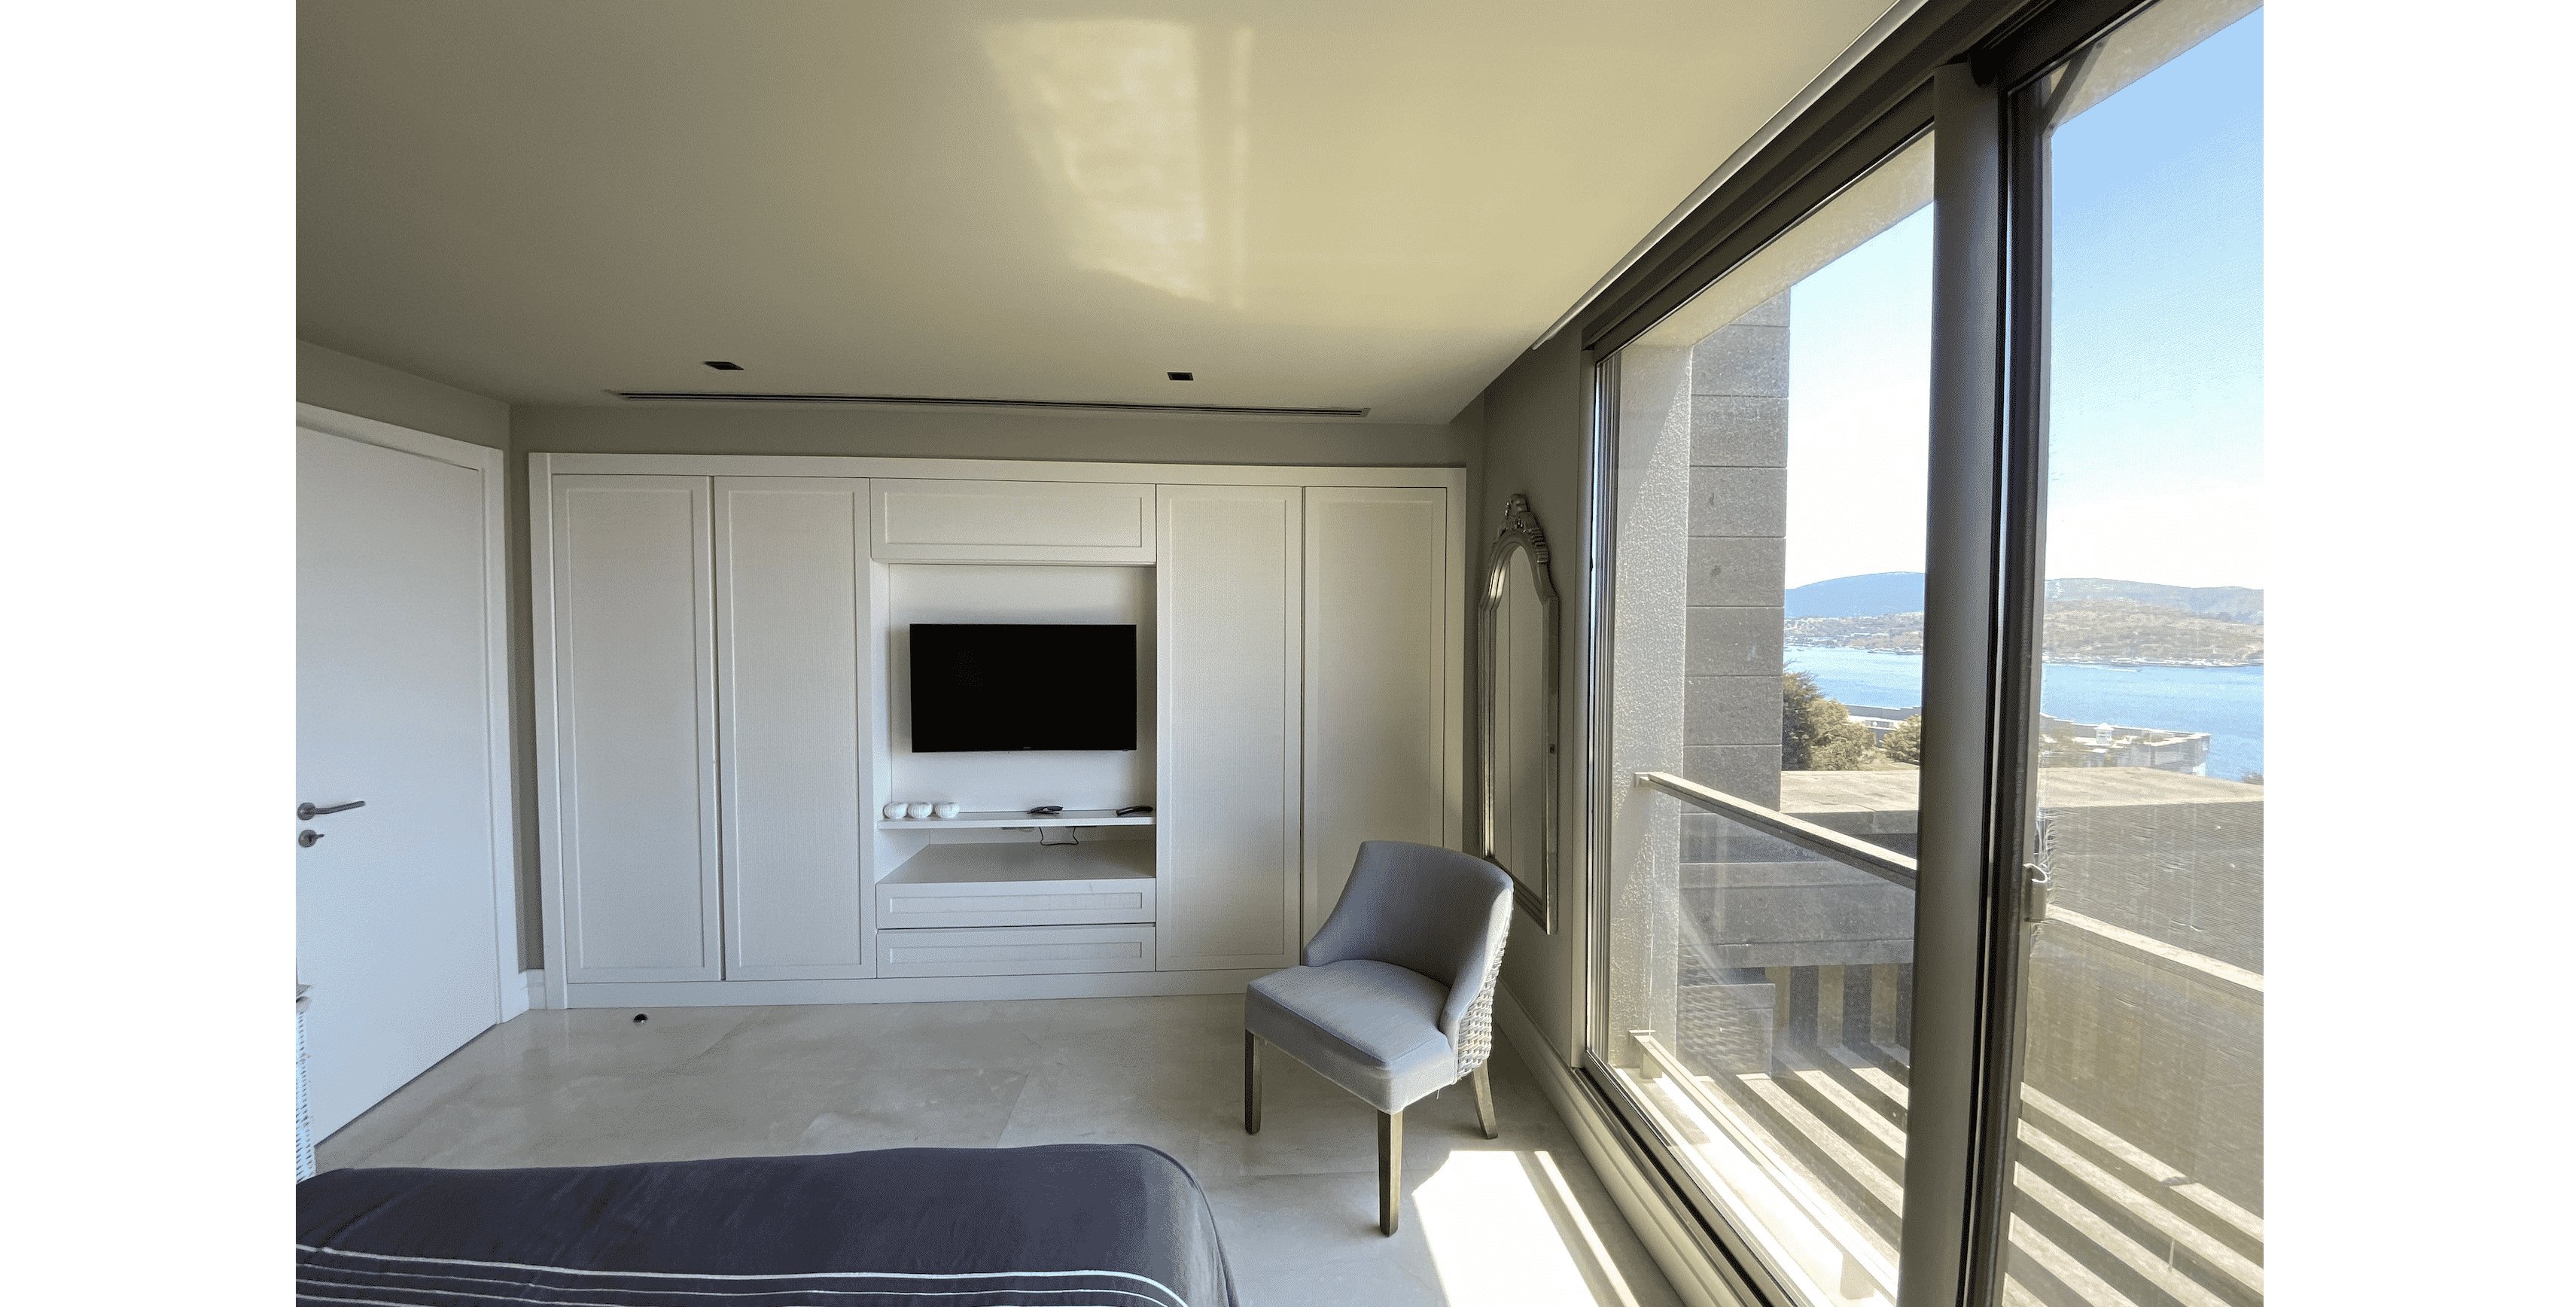 You are invited to a luxurious and comfortable life with sea view at Bodrum Caresse Residence. A magnificent, luxury residence for sale in a hotel concept, where every detail has been thought out and designed down to the smallest detail.